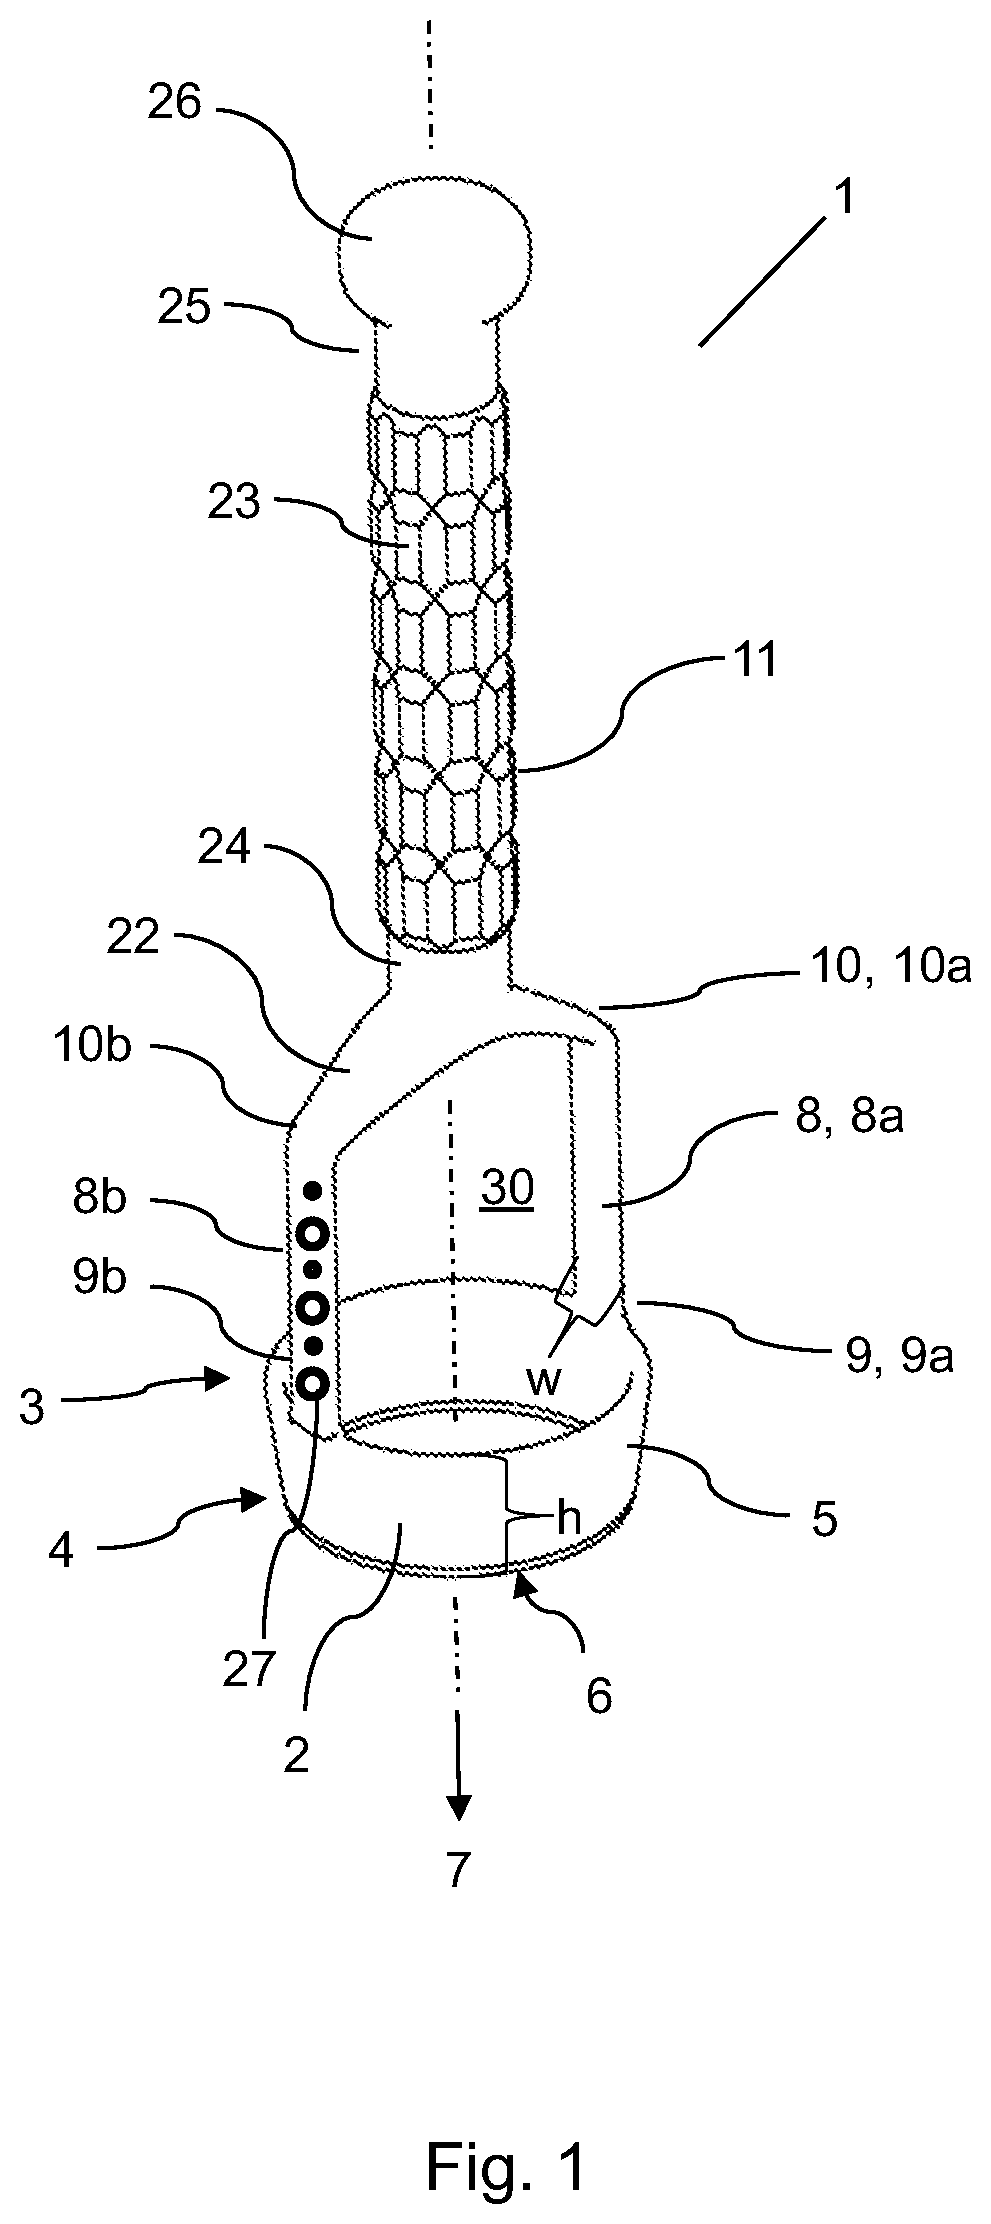 Surgical cutting apparatus for removal of a tumour from human tissue